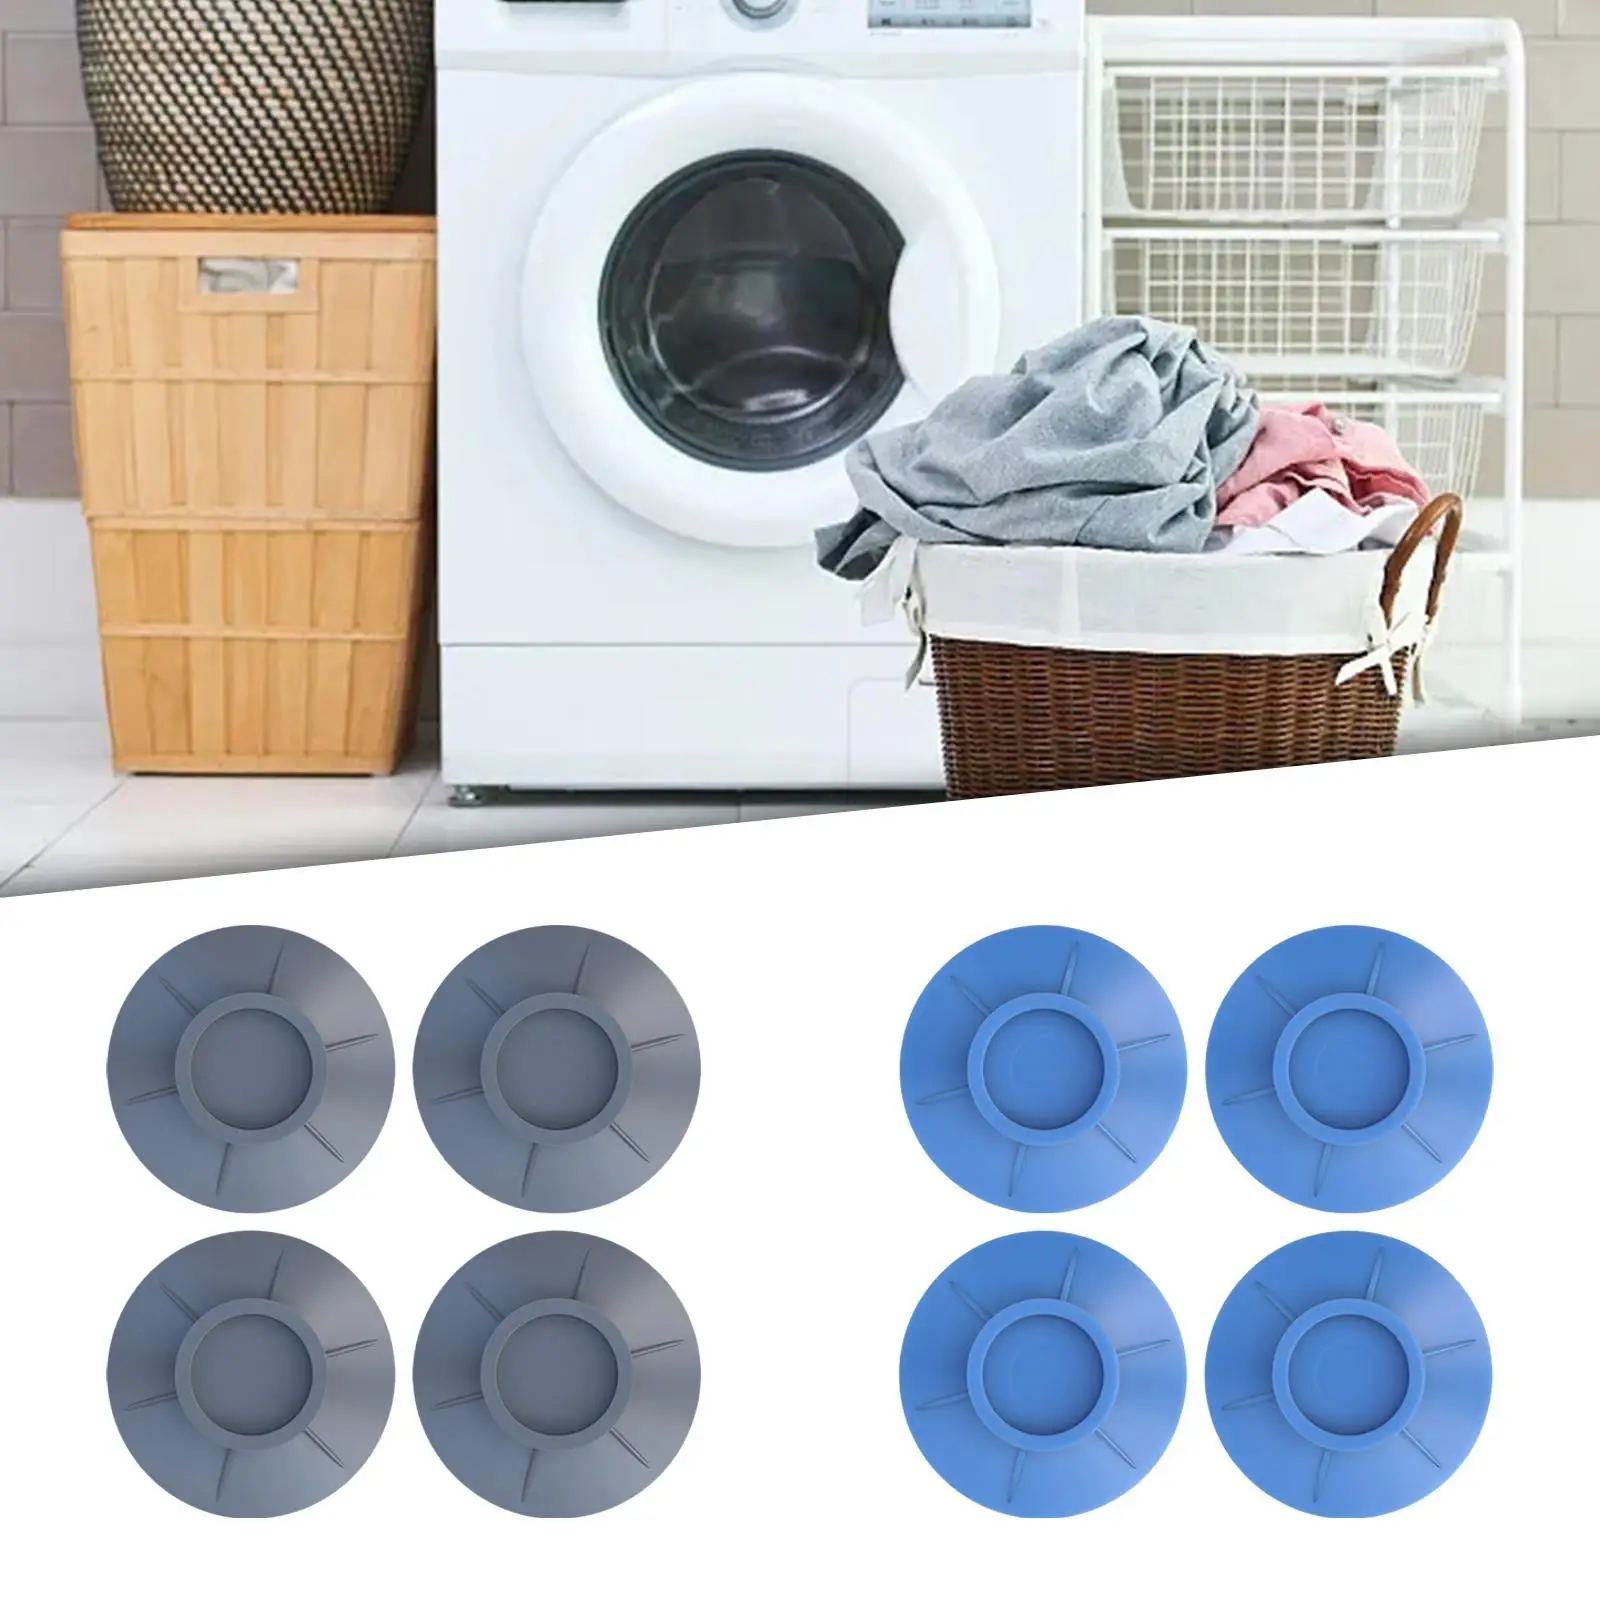 4 Pieces Washing Machine Foot Pad Floor Protection Multifunctional Round Base Shockproof for Home Furniture Washing Machine